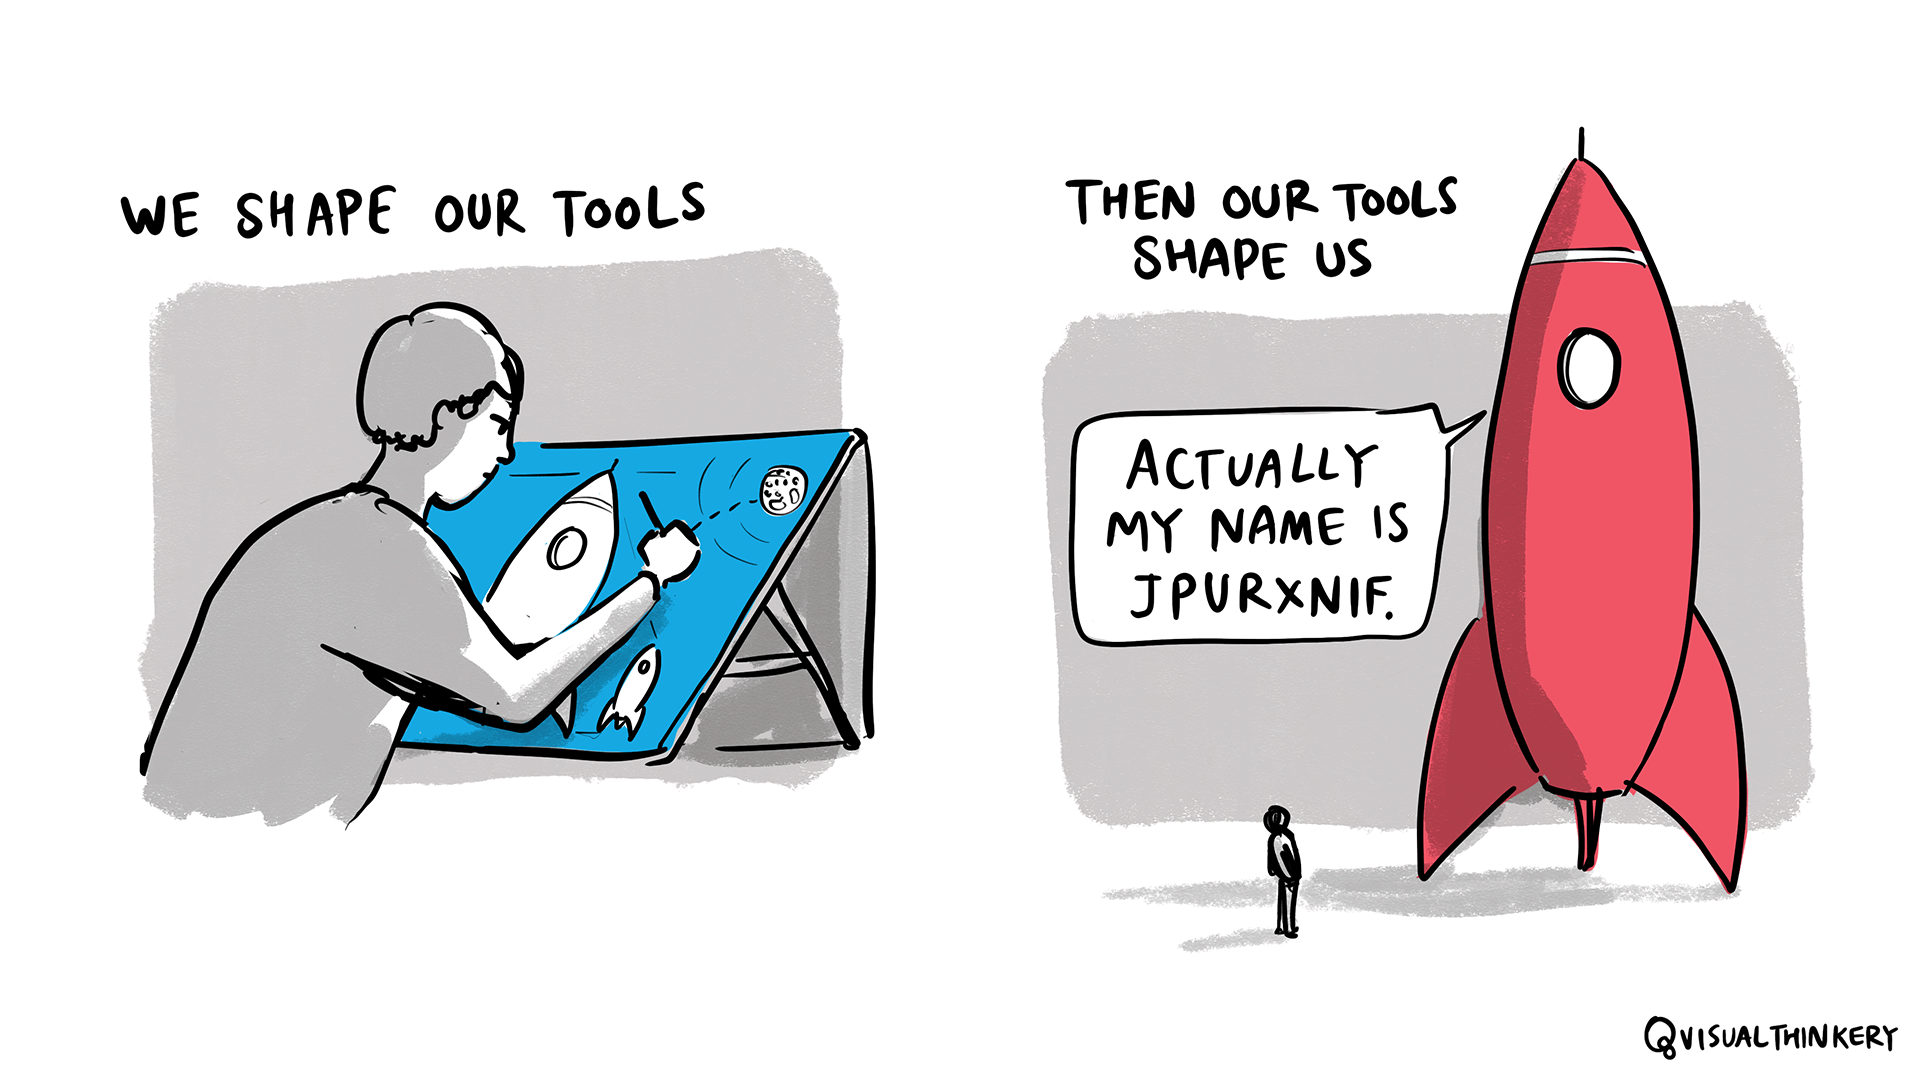 We shape our tools